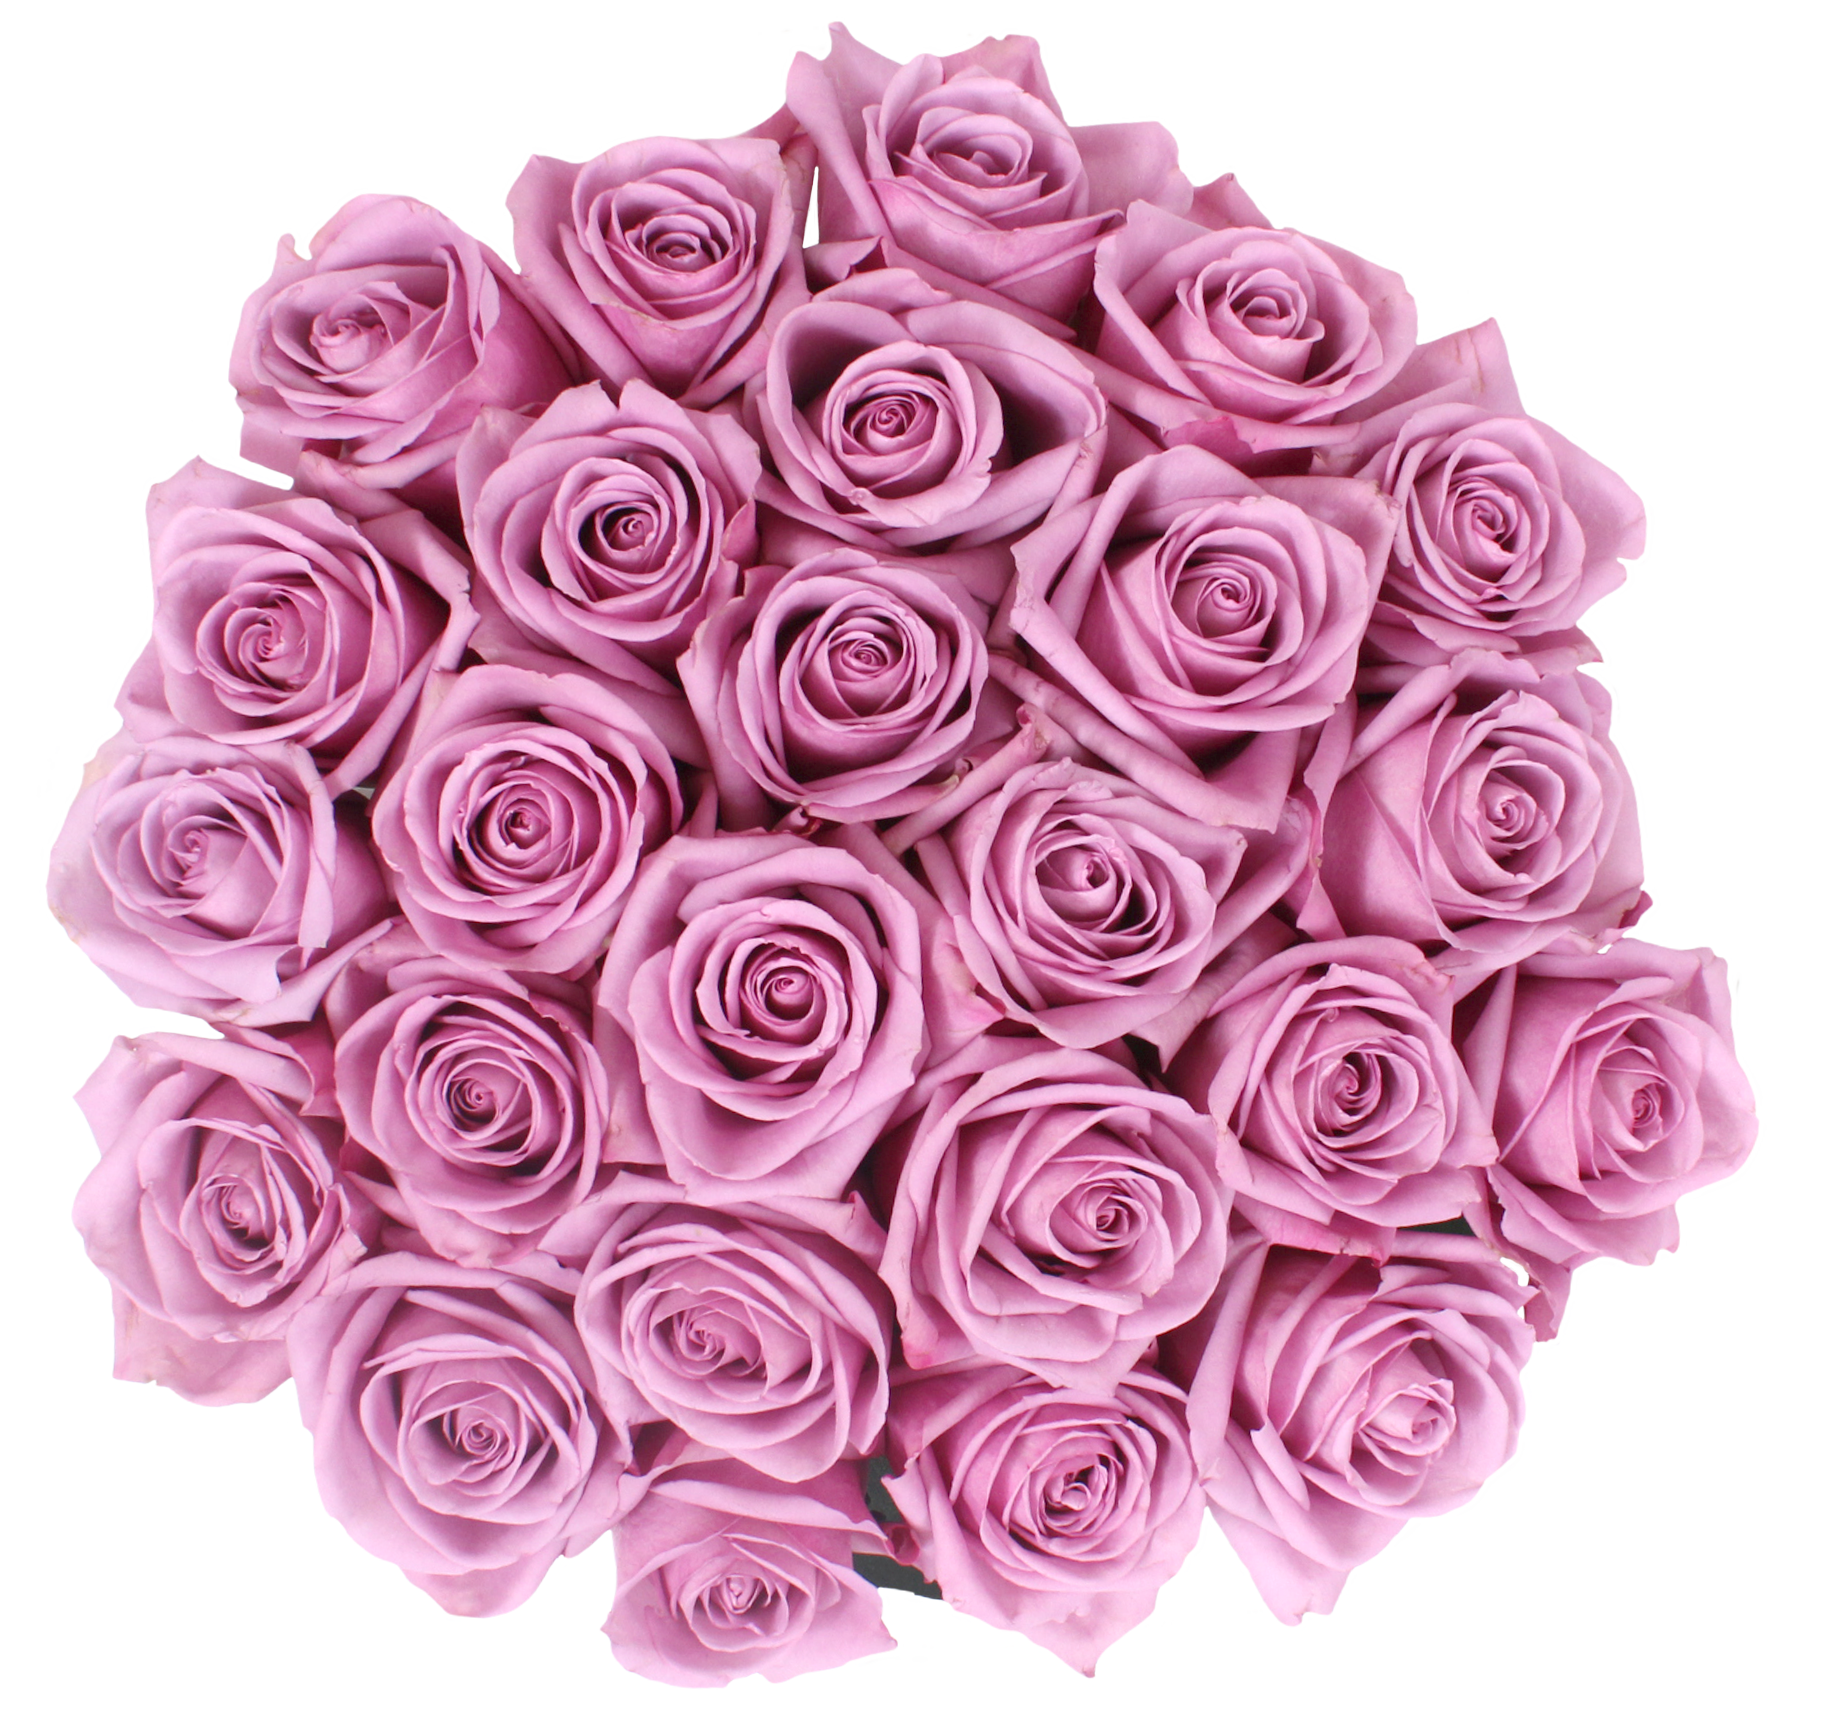 2 x 1 ROSES BUY 25 Stems Get 25 Stems FREE (25 Stems per Bunch)